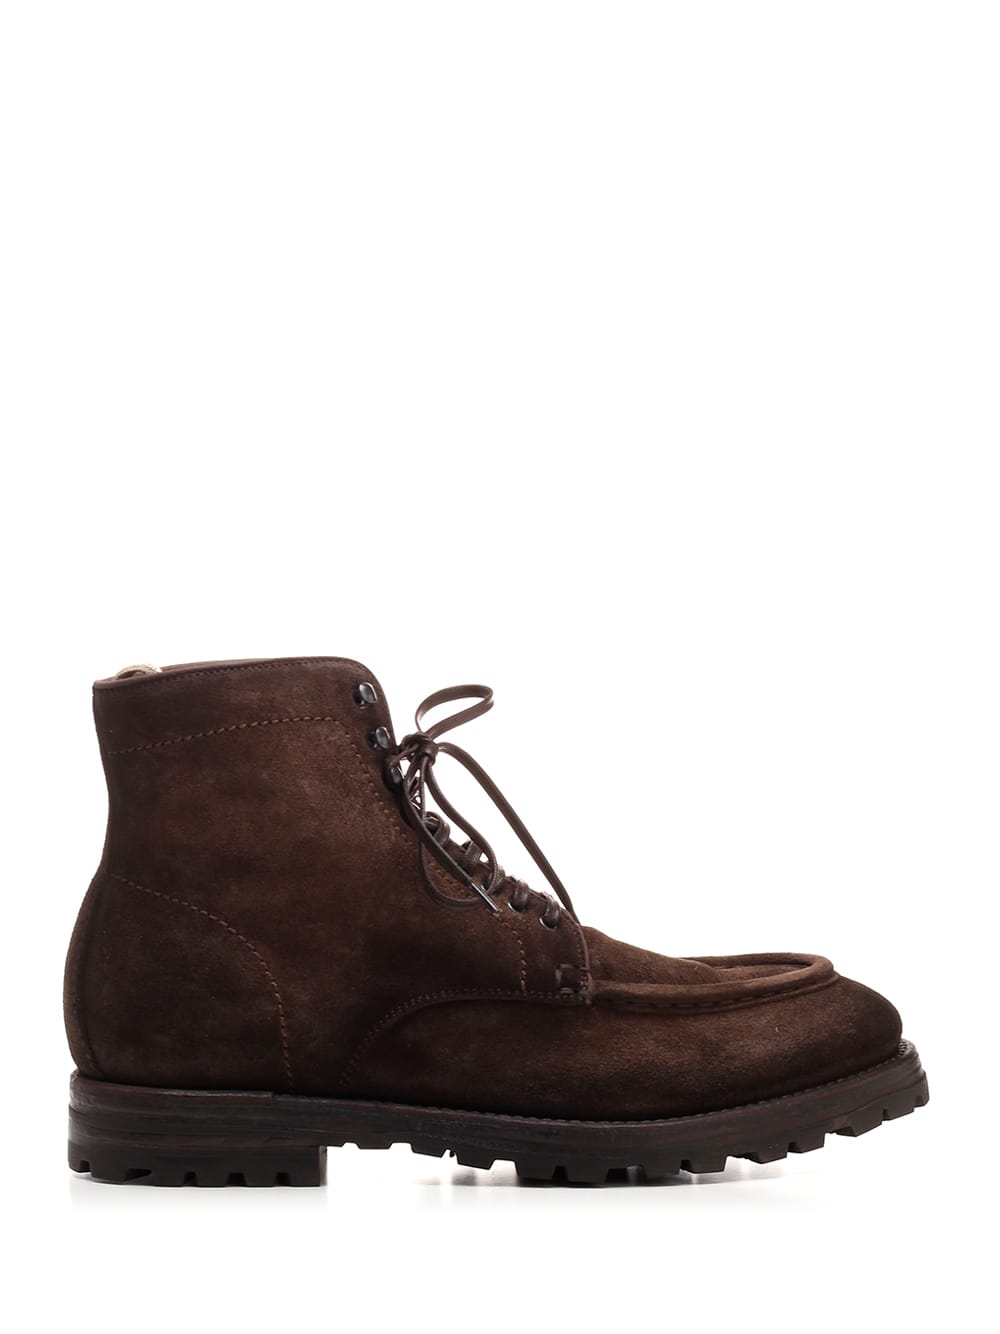 OFFICINE CREATIVE BROWN ANKLE BOOT